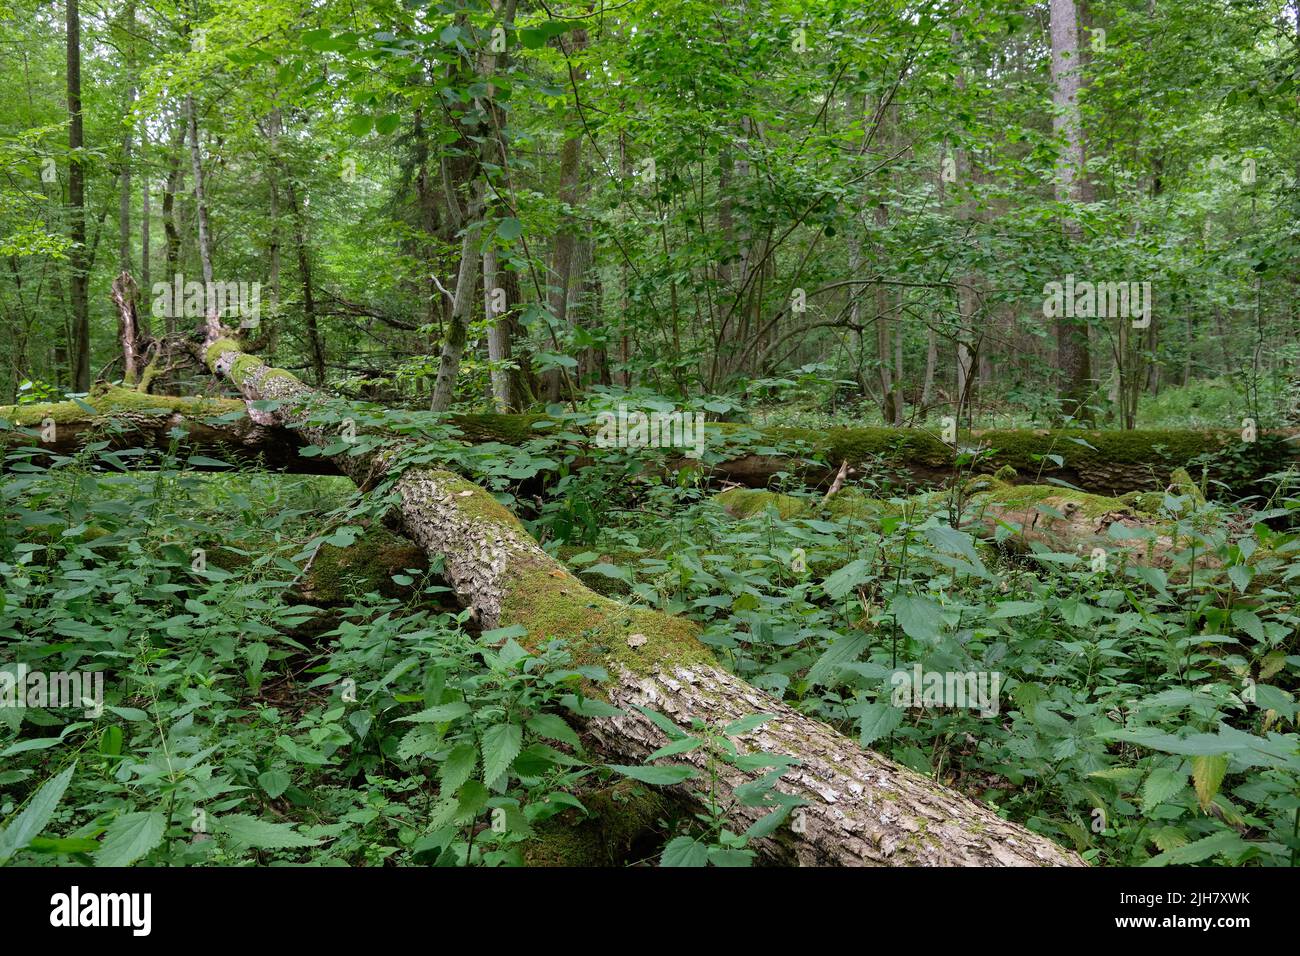 Broken old ash trees moss wrapped lying among plants in summertime deciduous tree stand, Bialowieza Forest, Poland, Europe Stock Photo